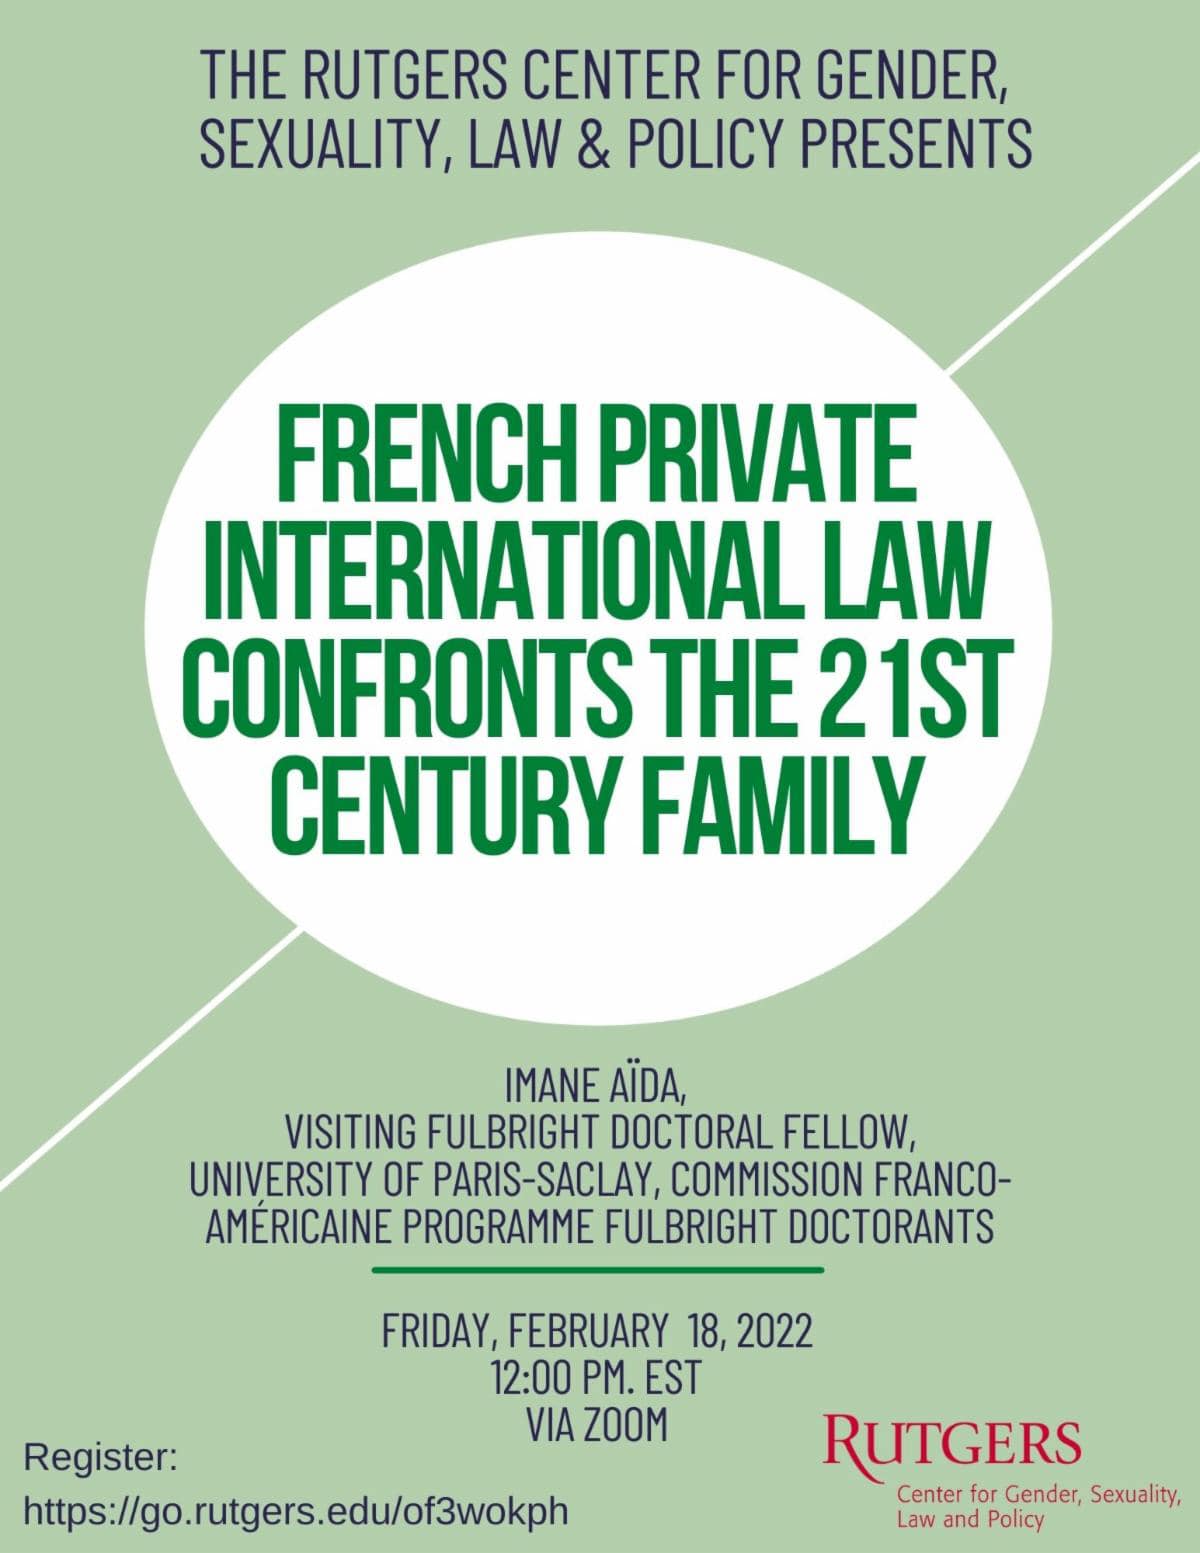 French private international law confronts the 21st century family